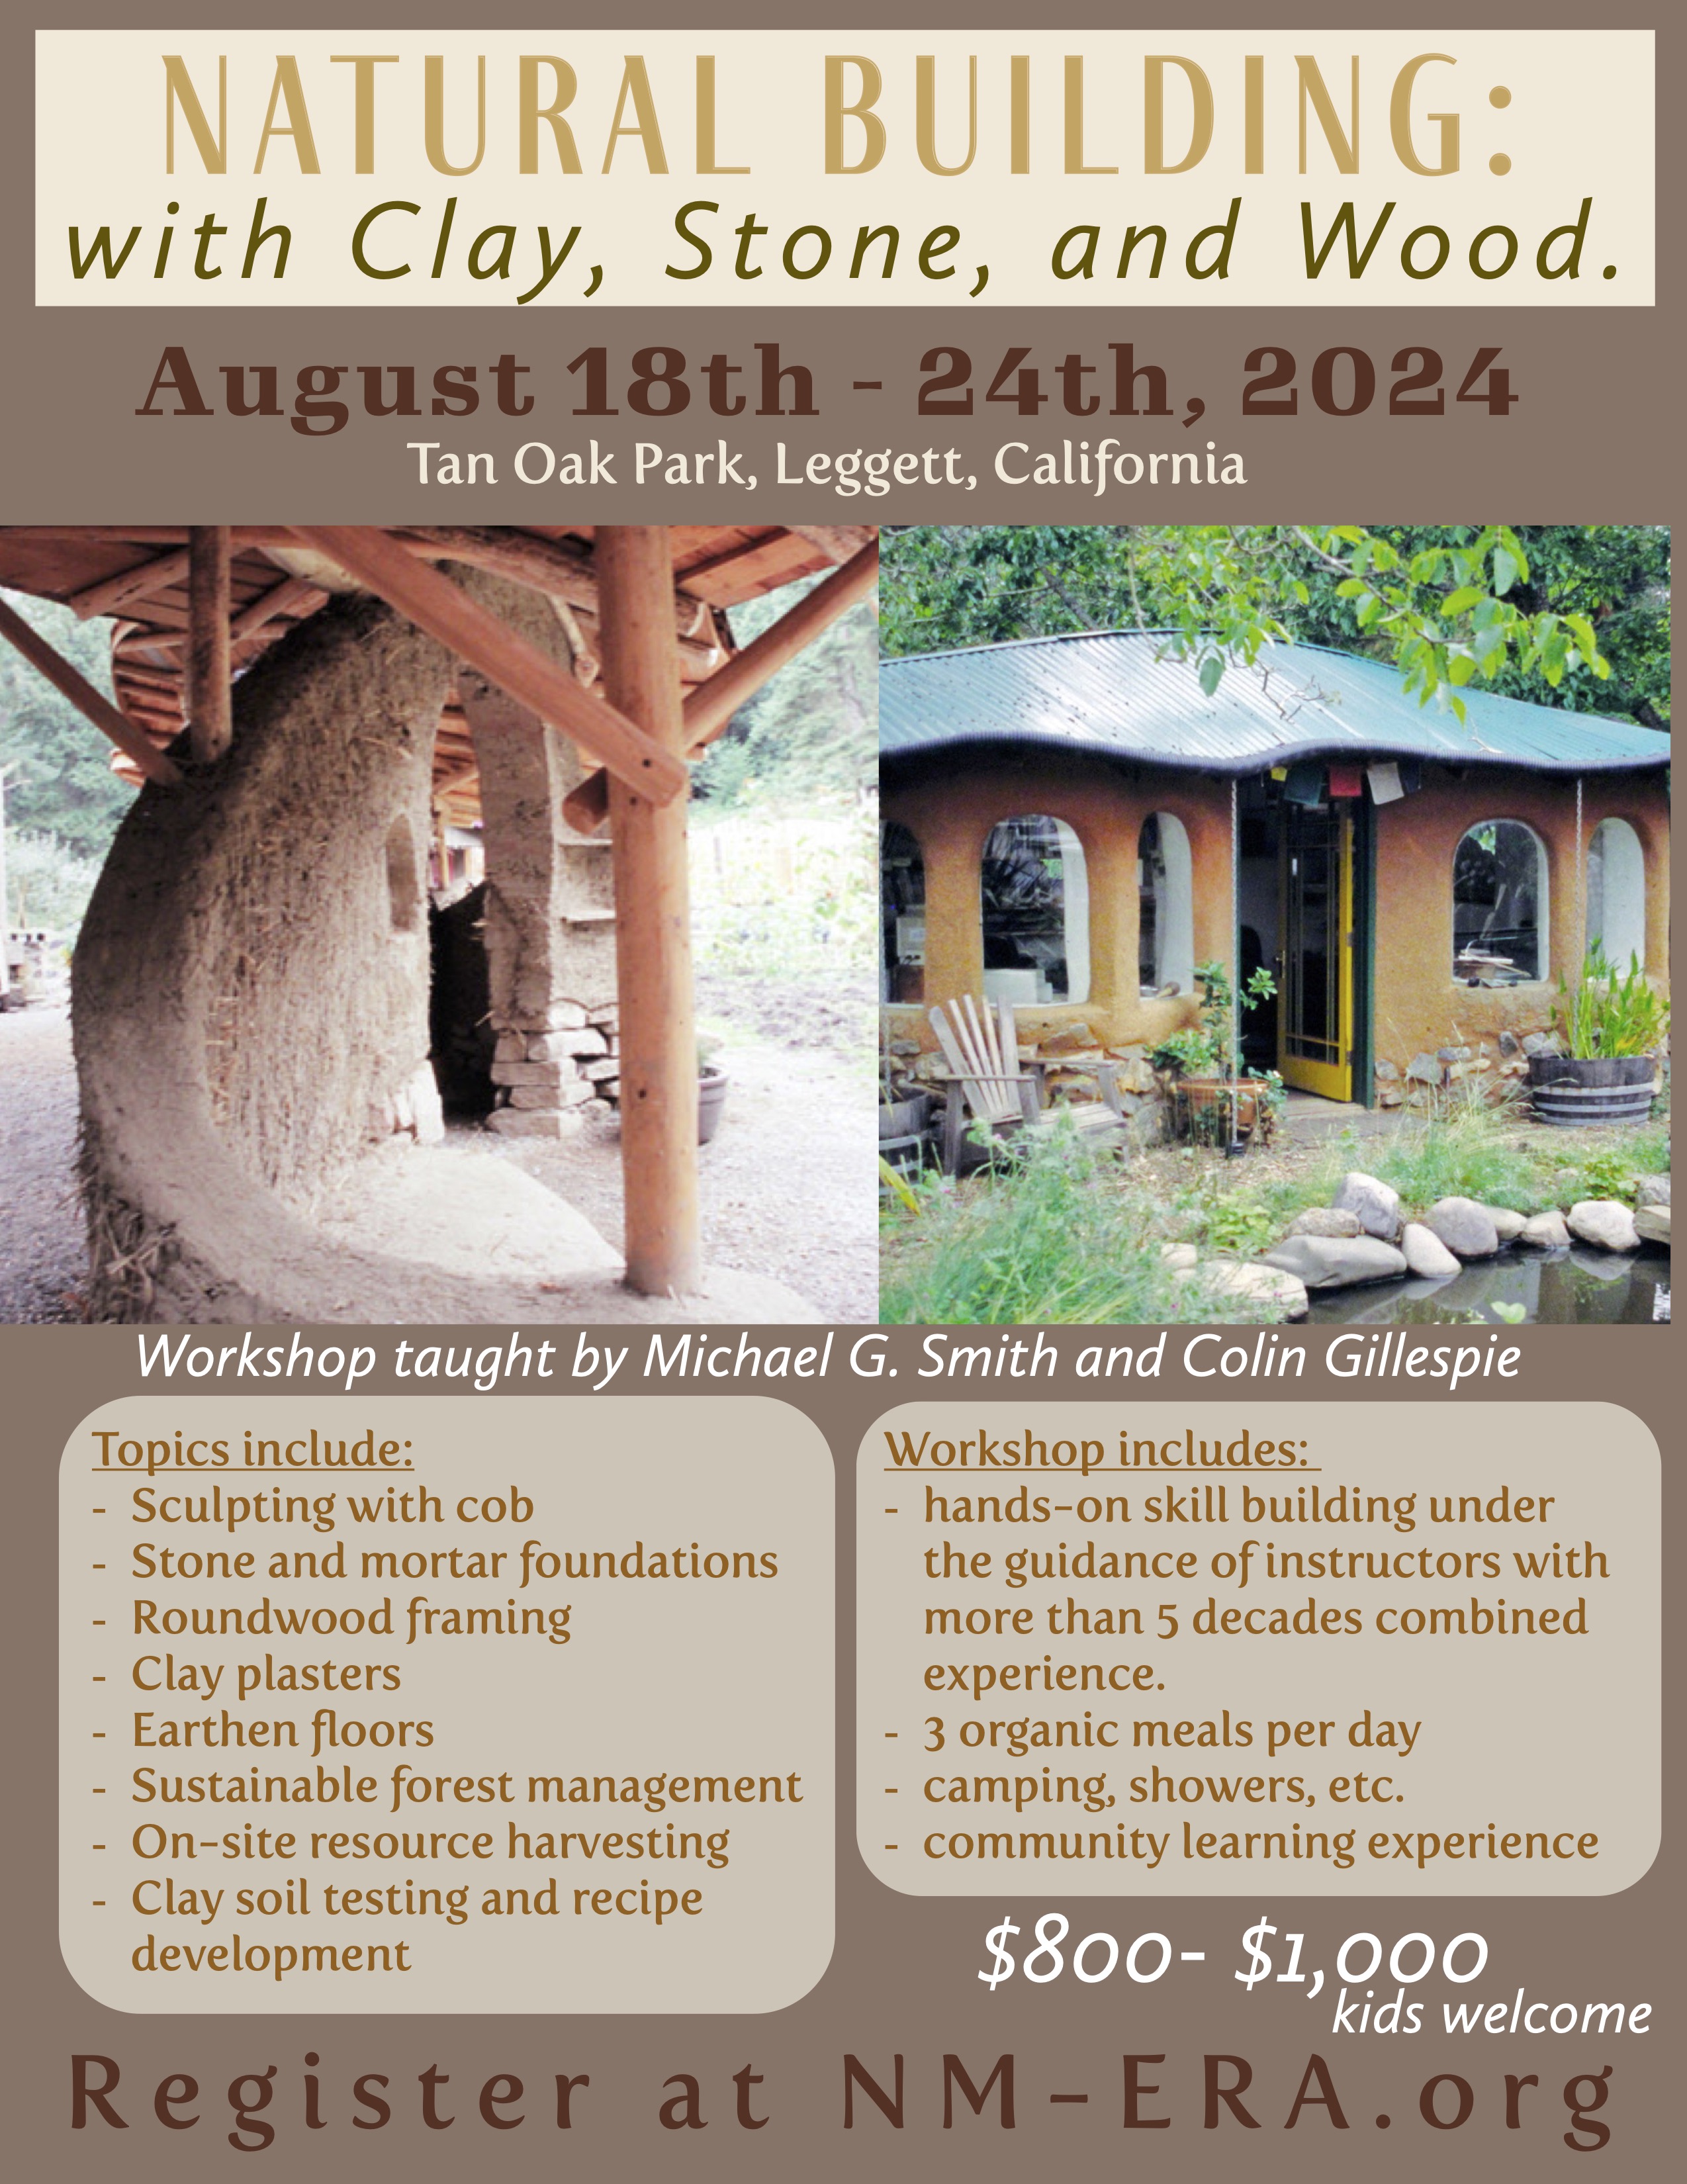 Natural Building with Clay, Stone, and Wood